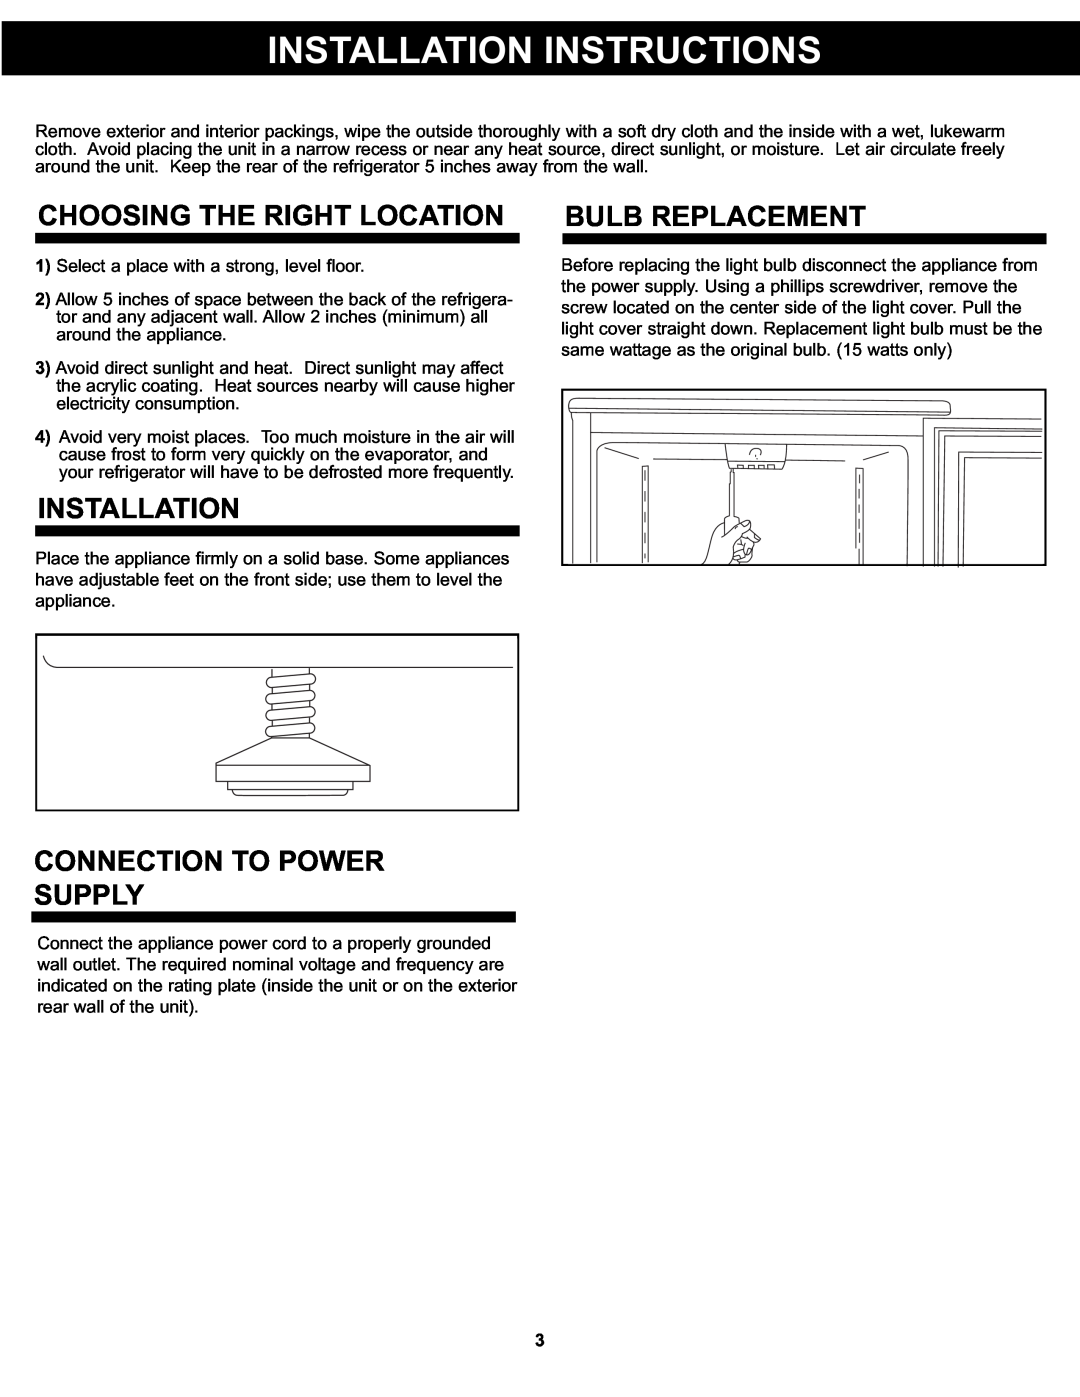 Danby DAR125SLDD Installation Instructions, Choosing The Right Location, Connection To Power Supply, Bulb Replacement 